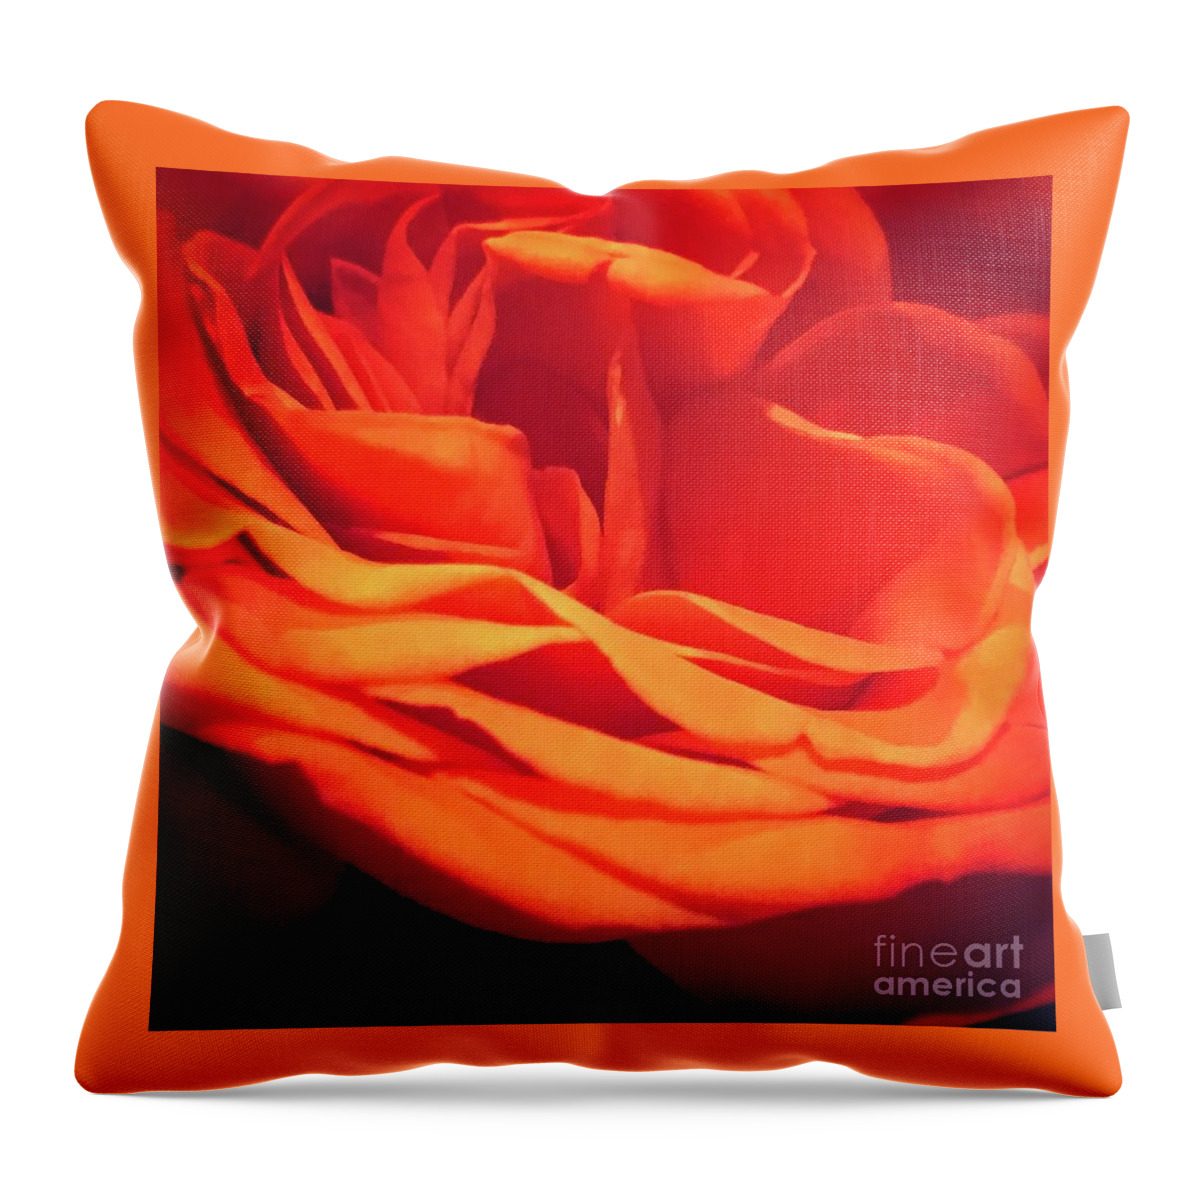 Orange Throw Pillow featuring the photograph Flower by Deena Withycombe